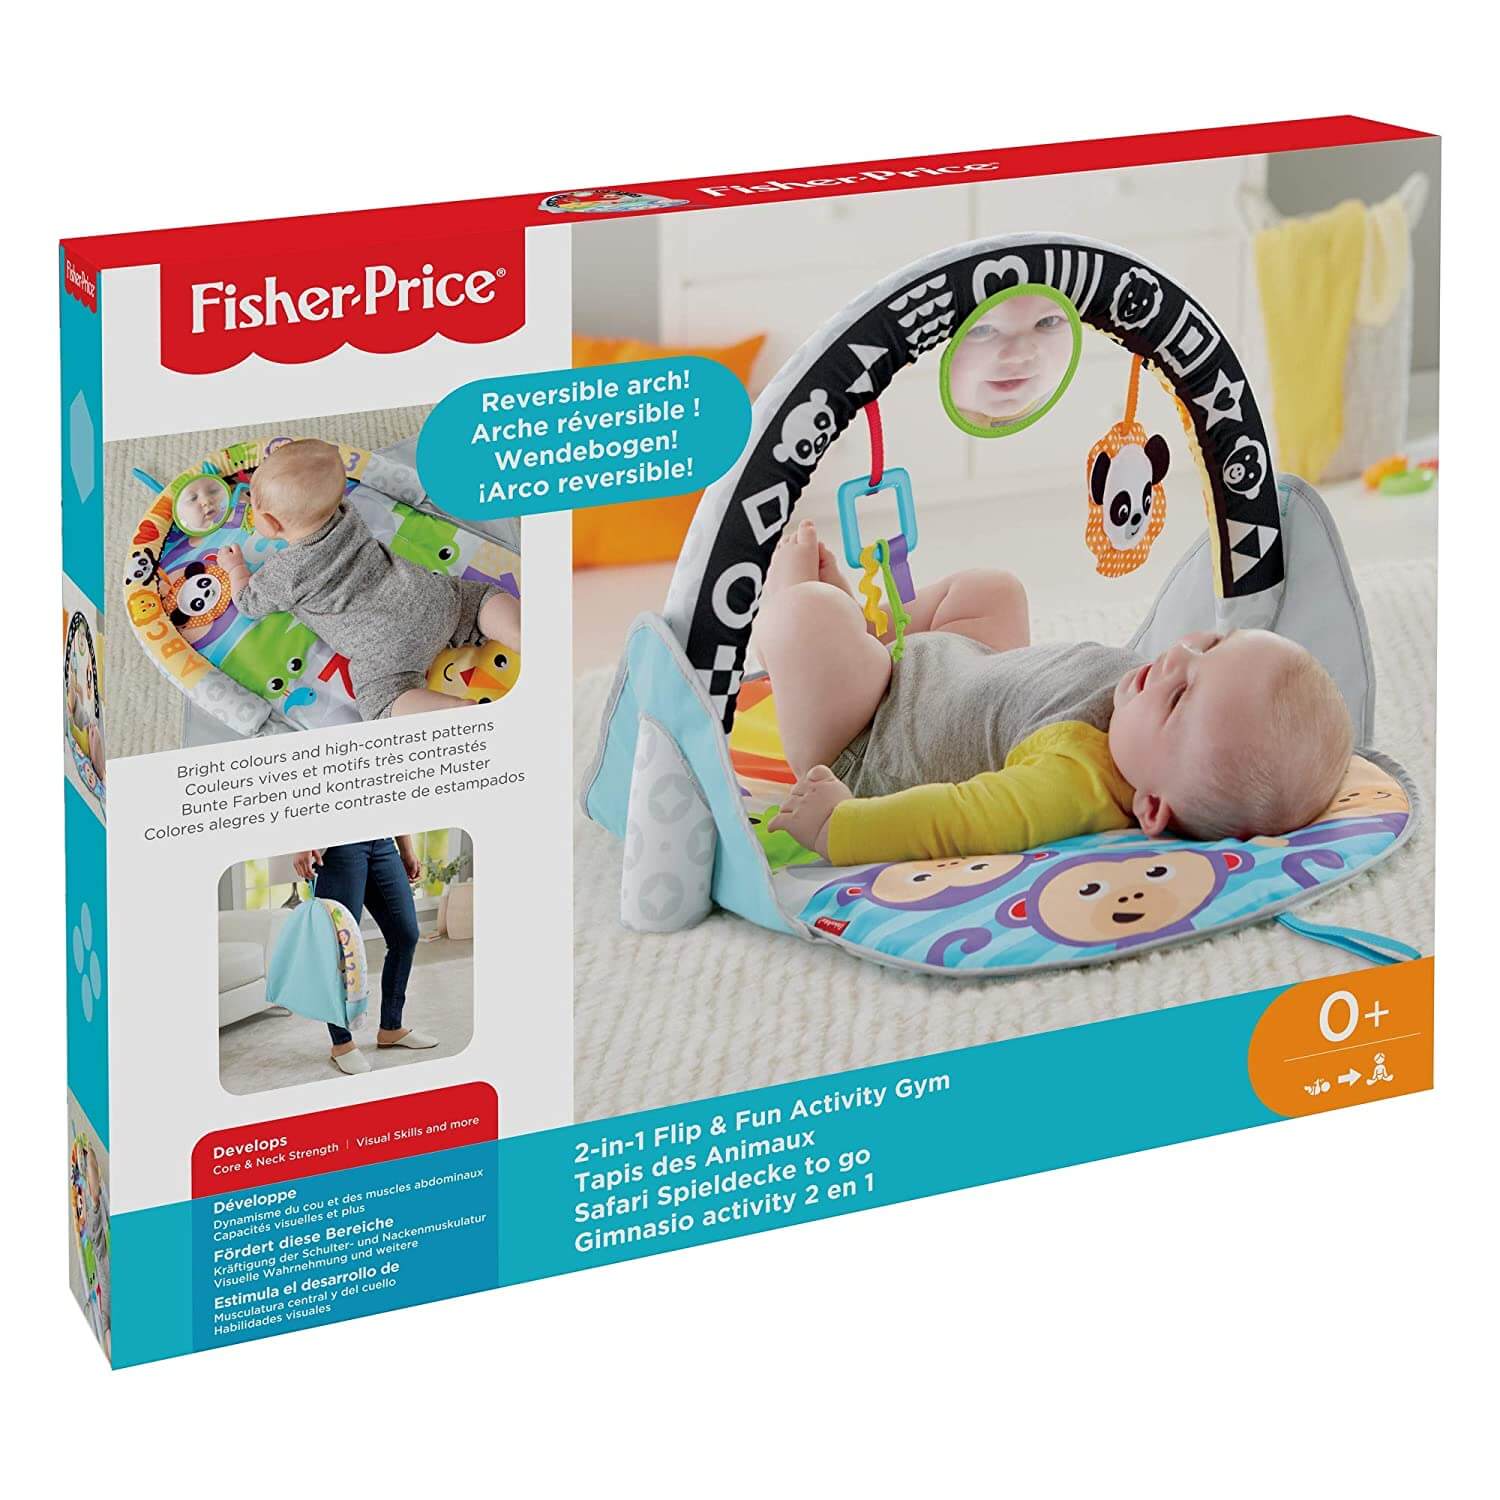 Front view of the Fisher-Price 2 In1 Flip Fun Actvity Gym packaging.